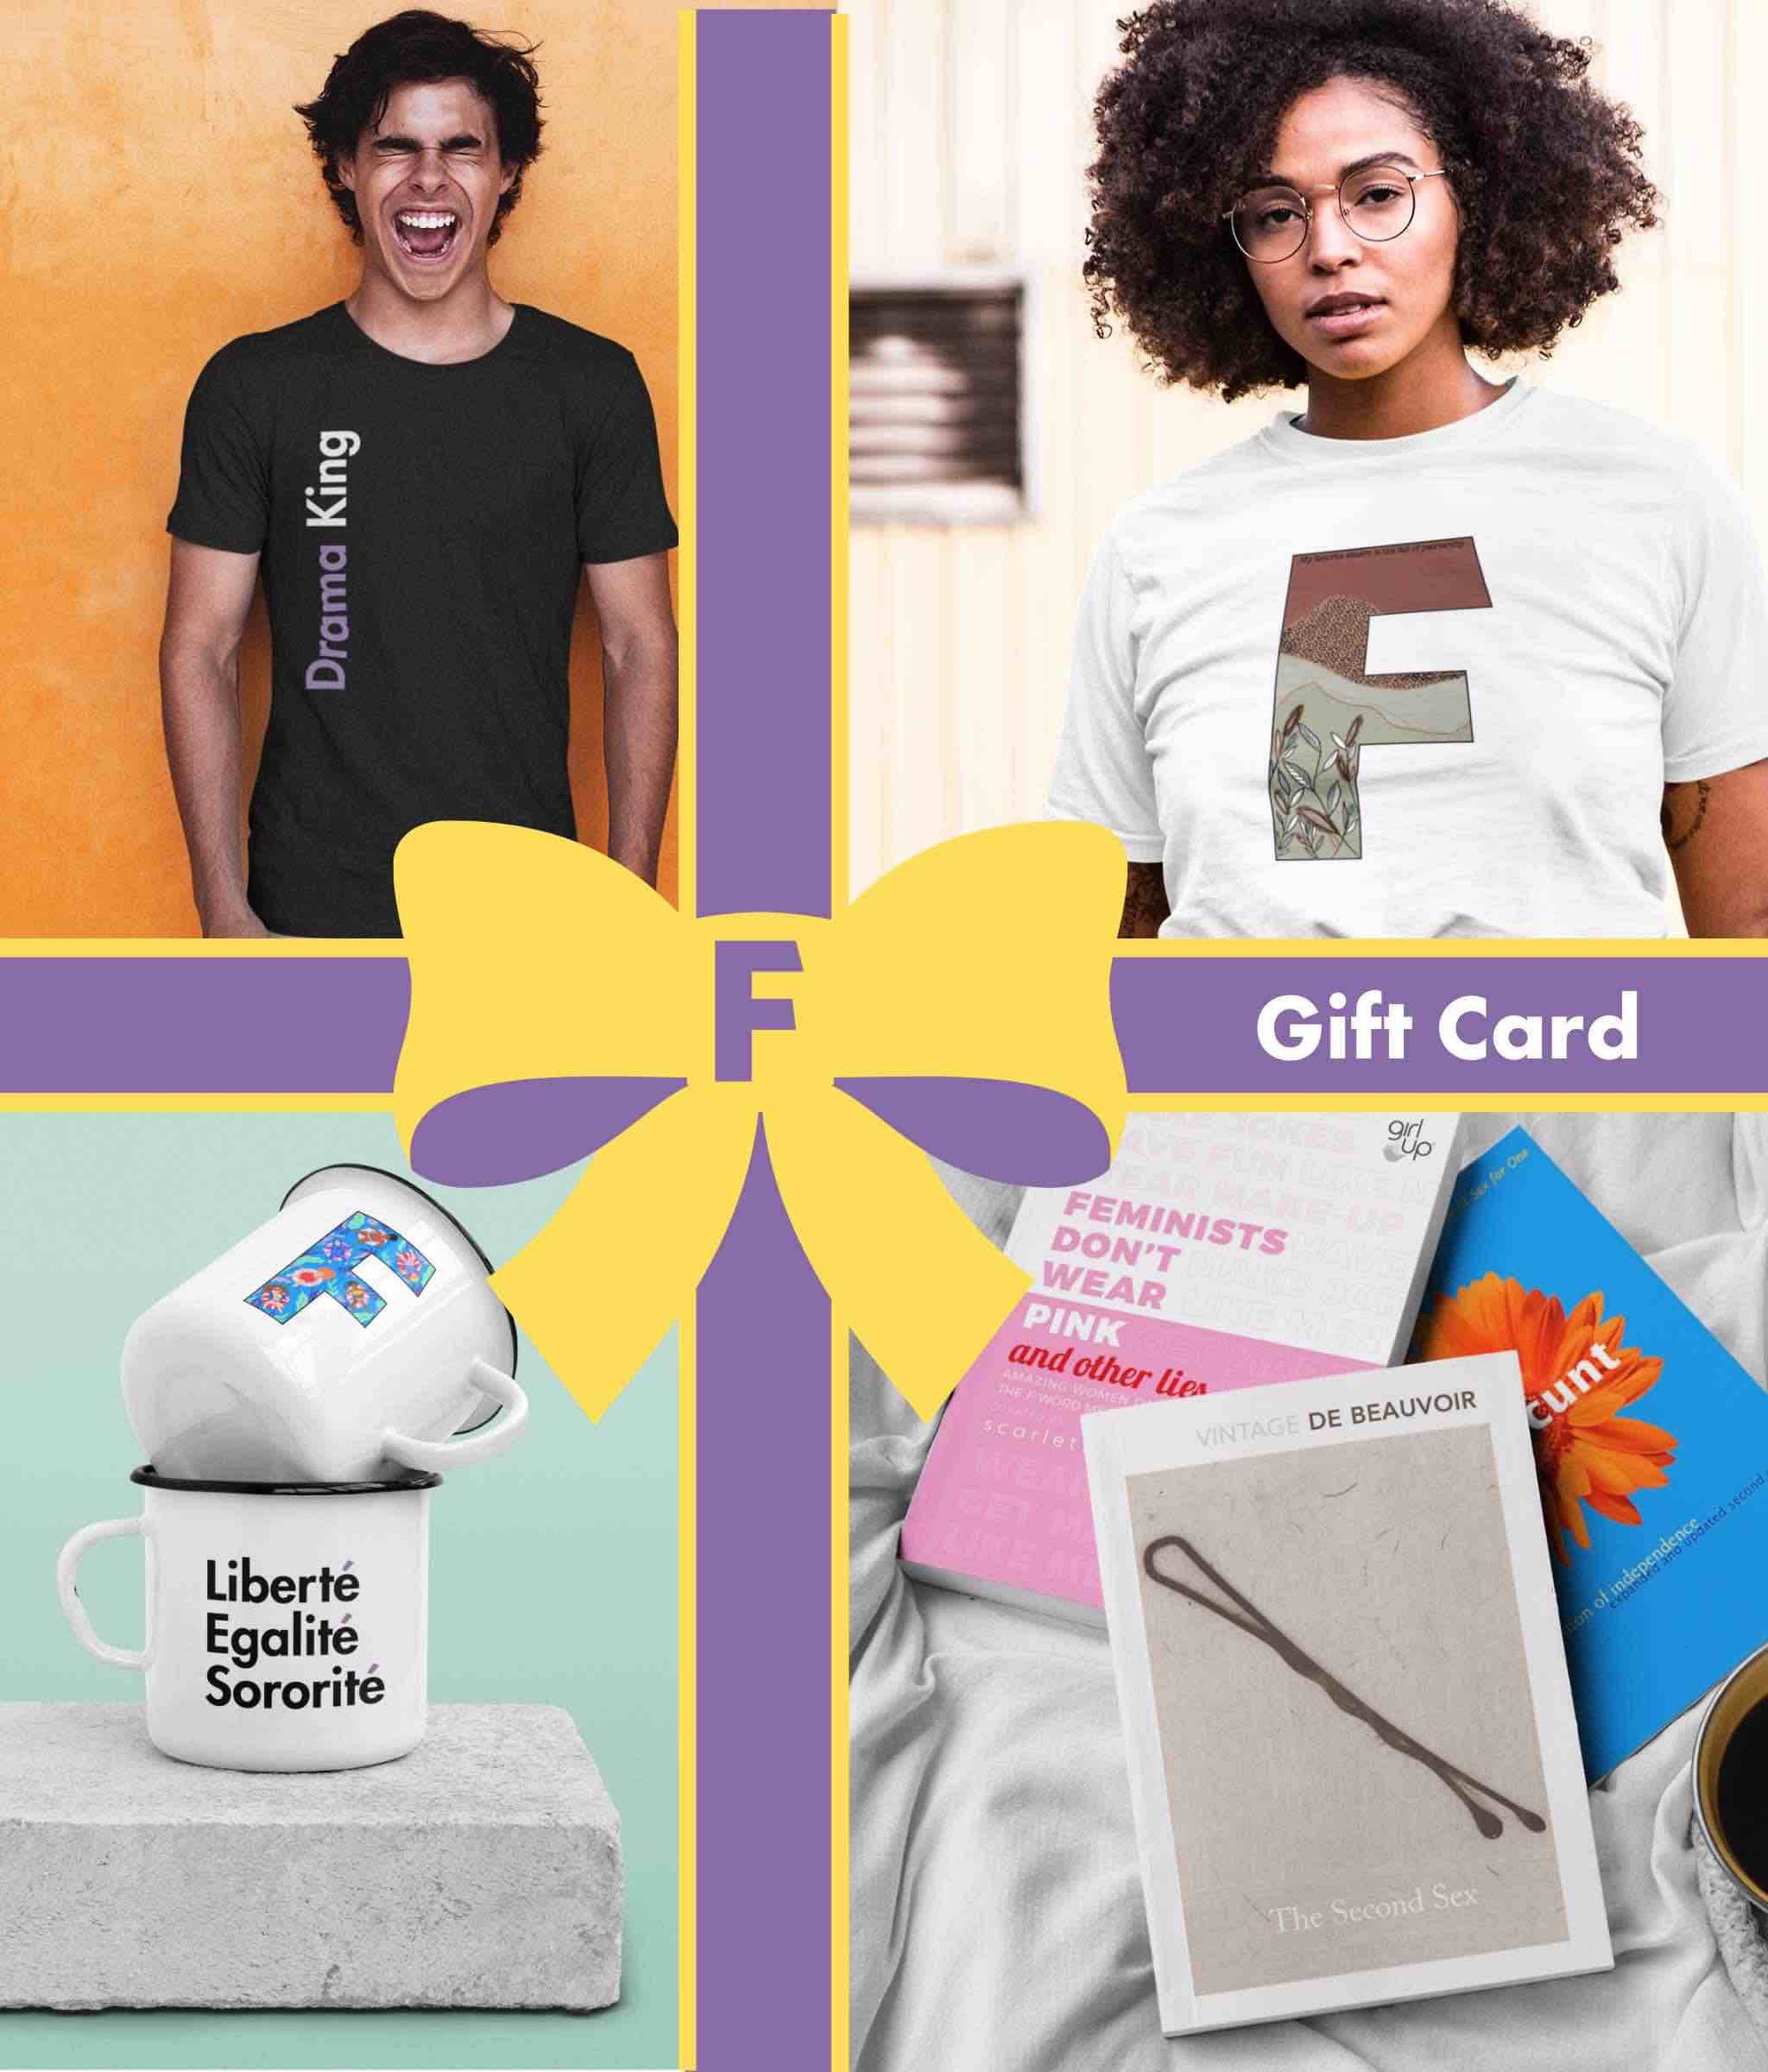 Gift Cards - The Feminist Shop